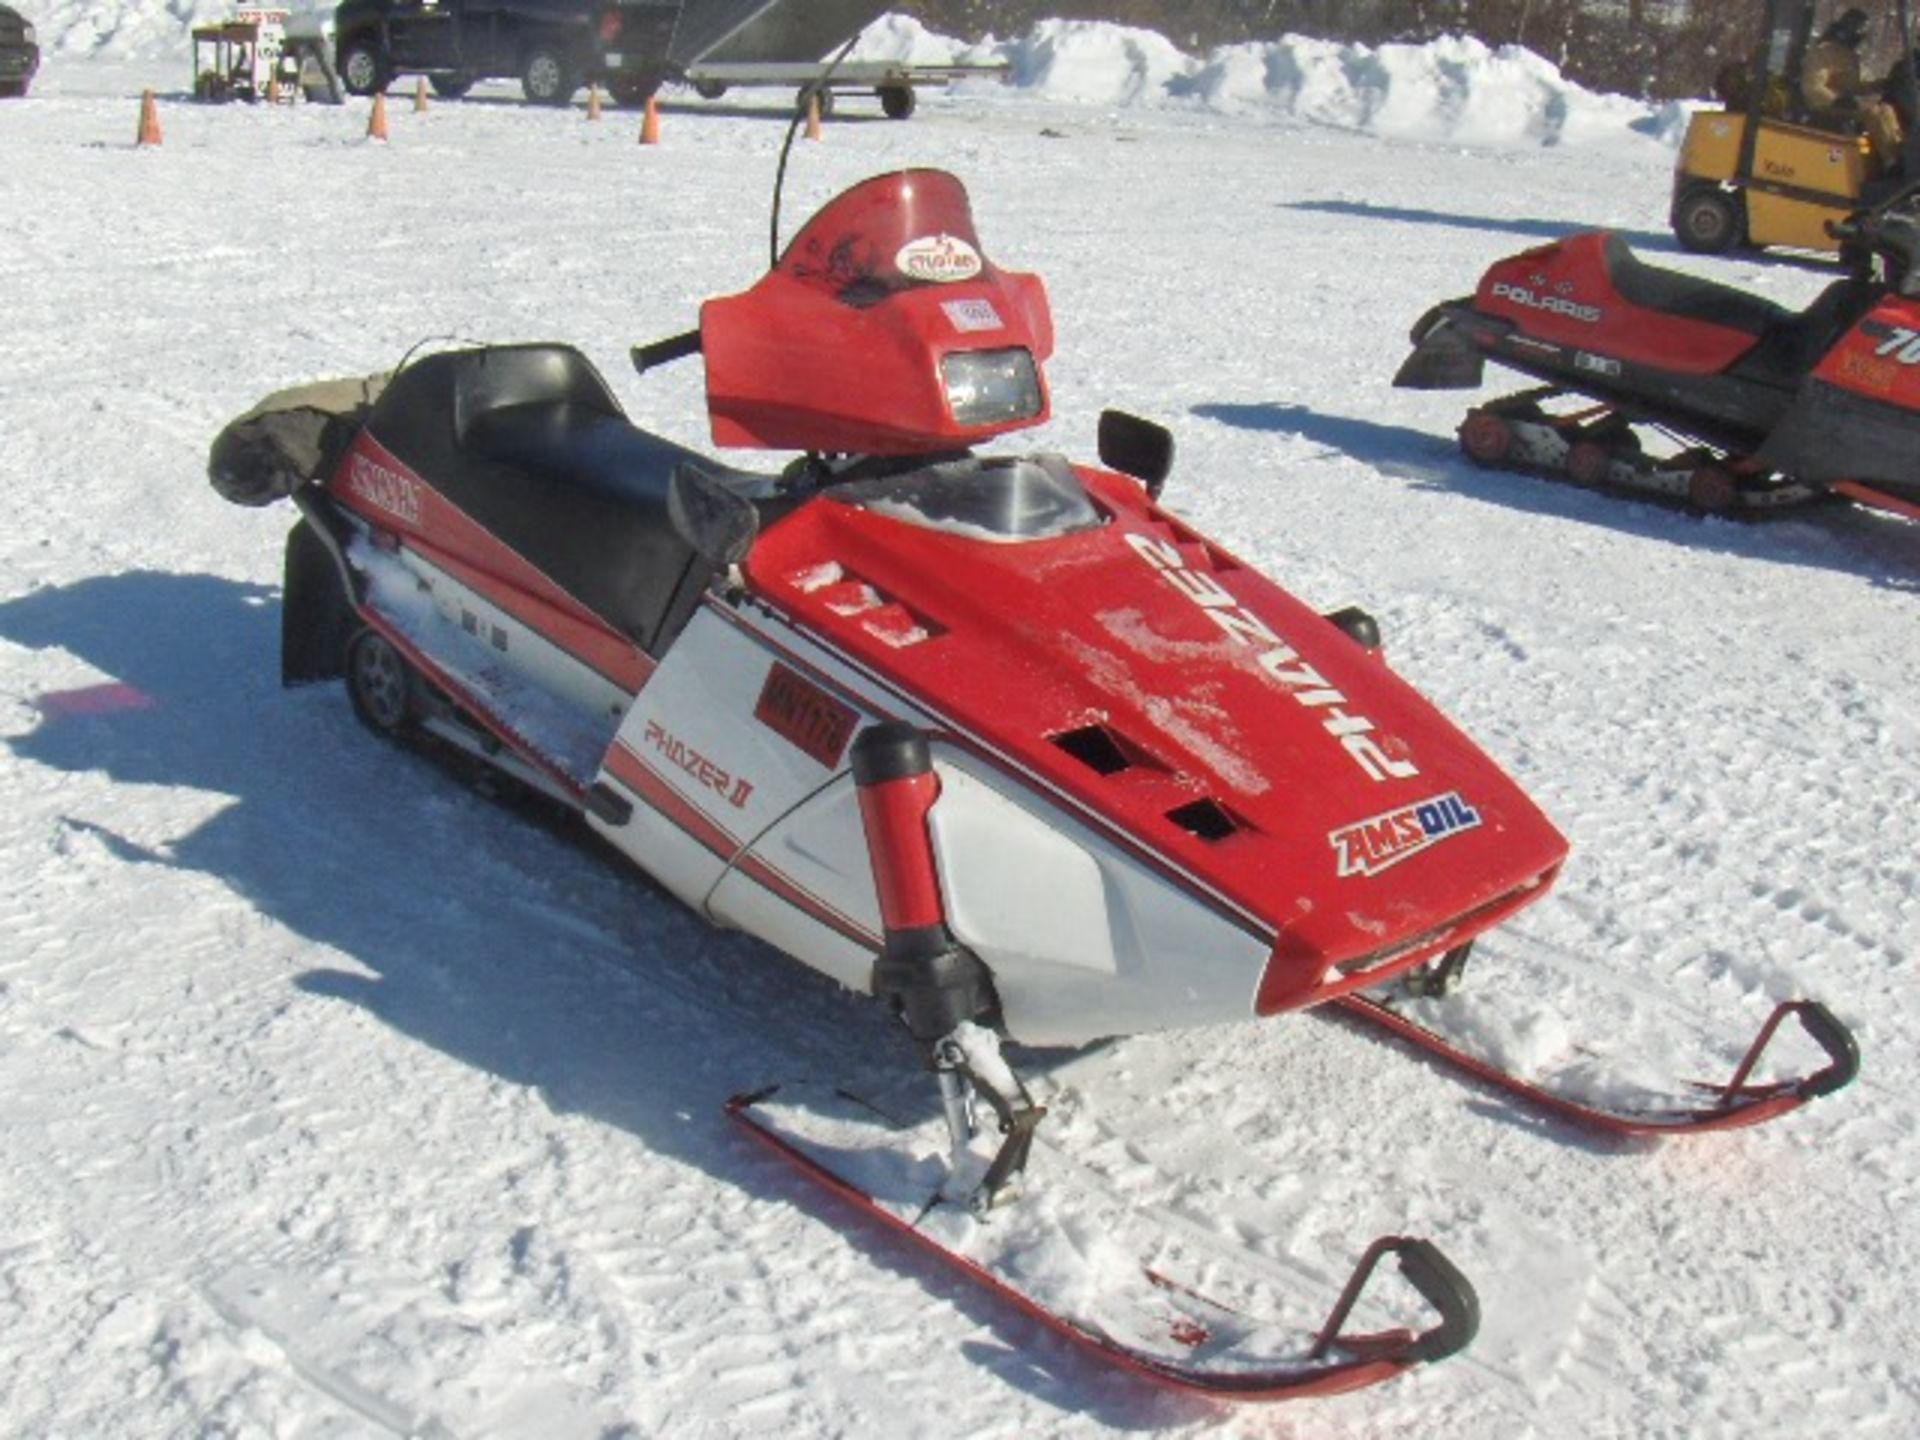 1990 YAMAHA 480 PHAZER II  87F002651 snowmobile, owner started at time of auction check in, 2 - Image 2 of 3